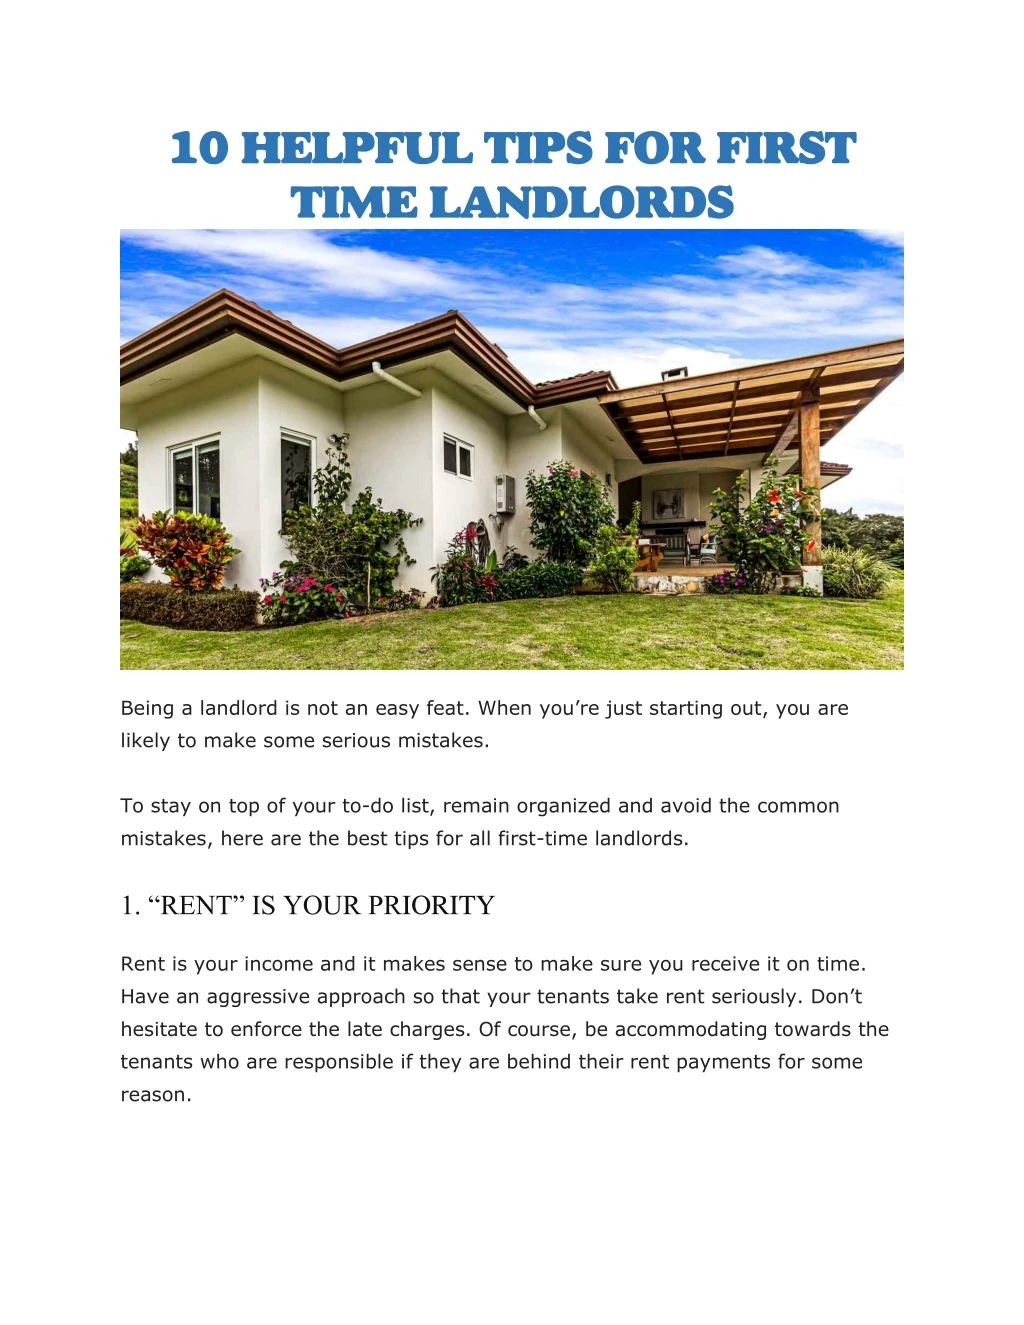 10 helpful tips for first time landlords